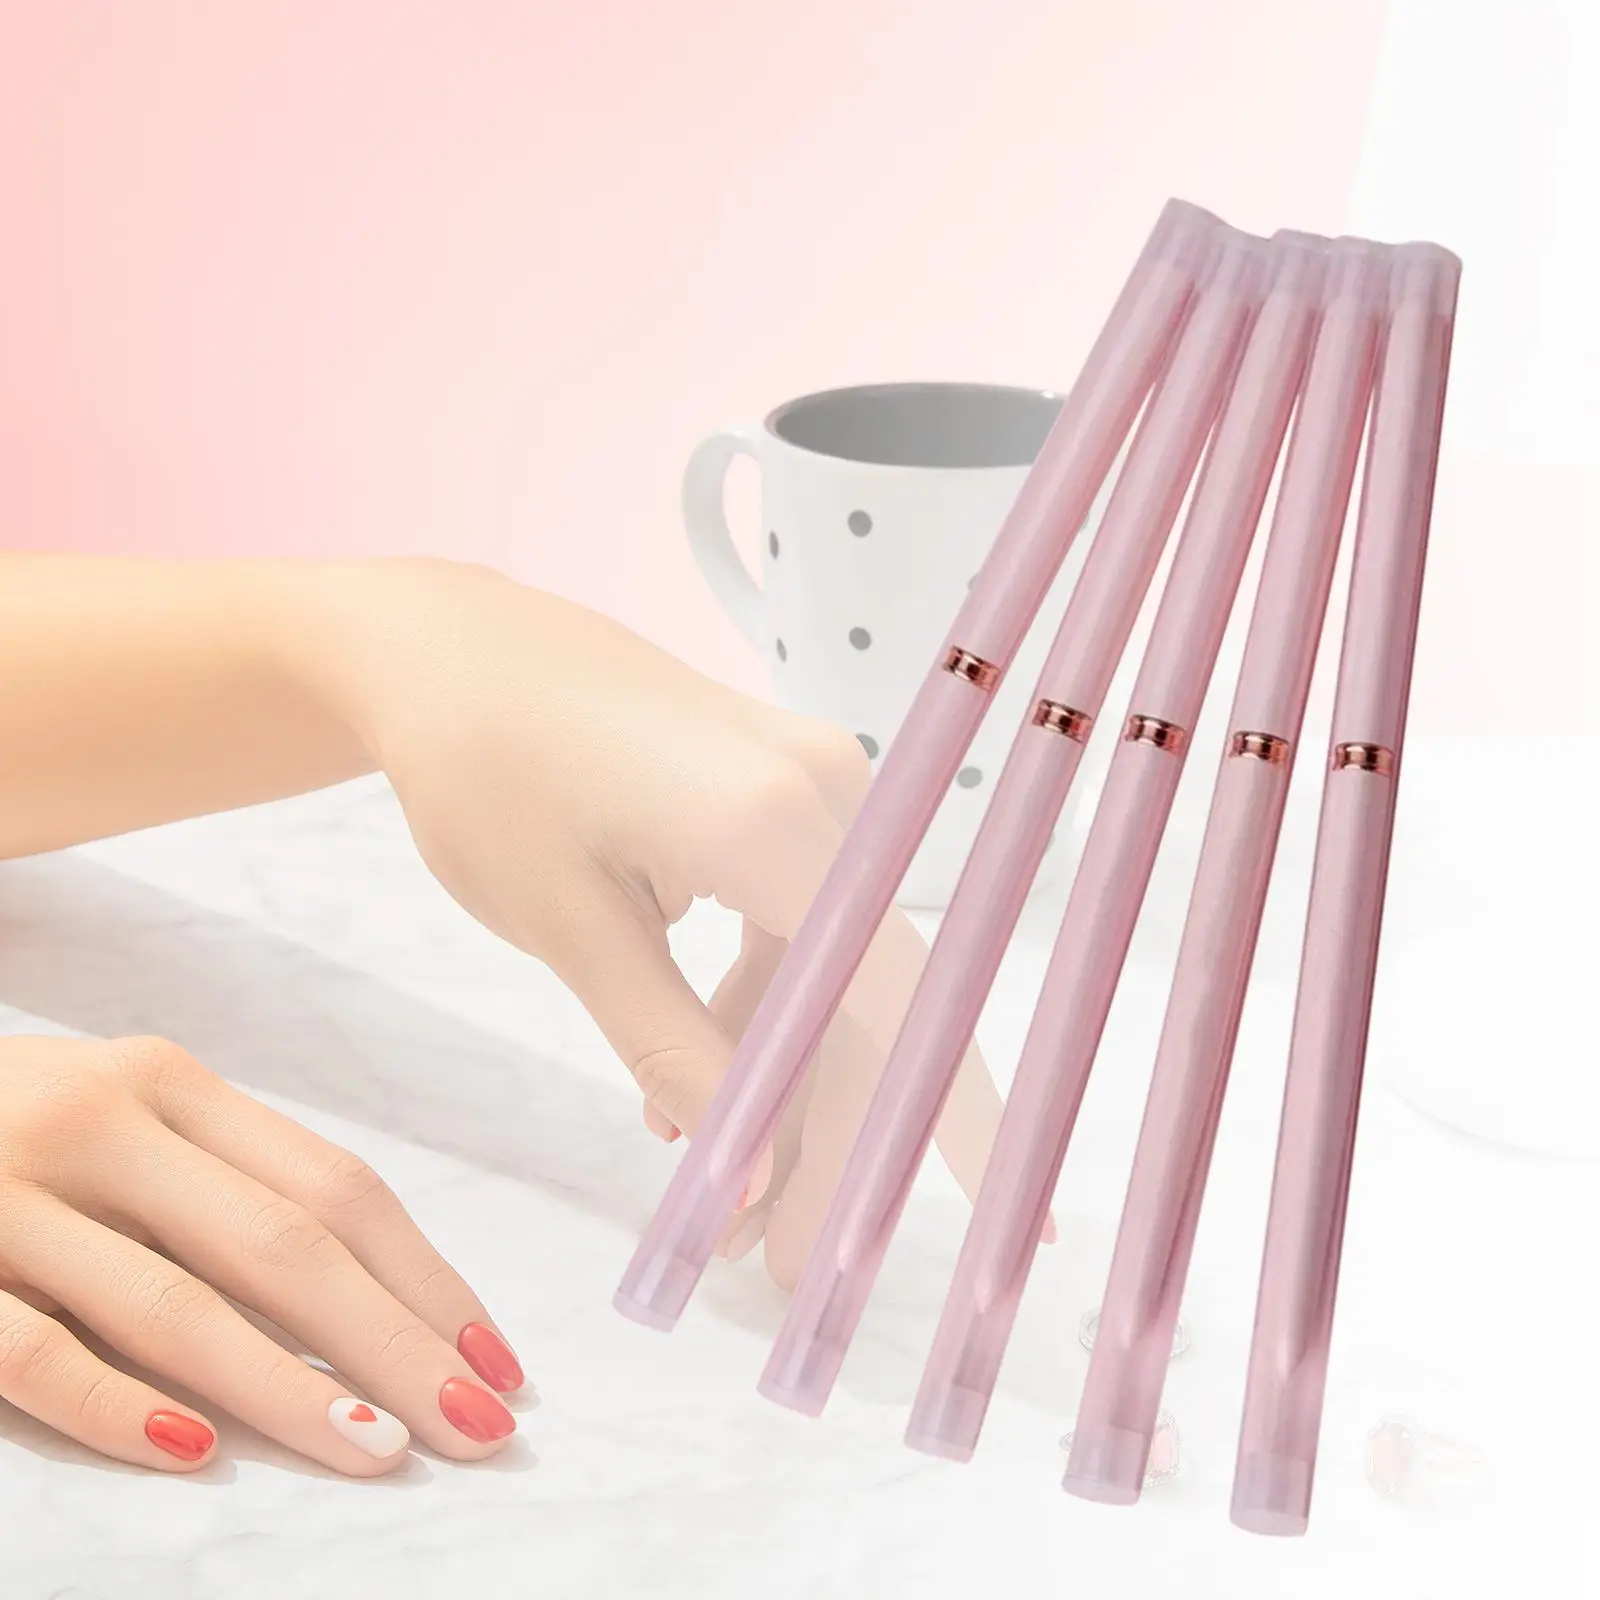 5 Pieces Nail Art Liner Brush Set for Nail Painting Drawing Fine Drawing Nail Art Design Brushes Tool Thin Details Pulling Lines